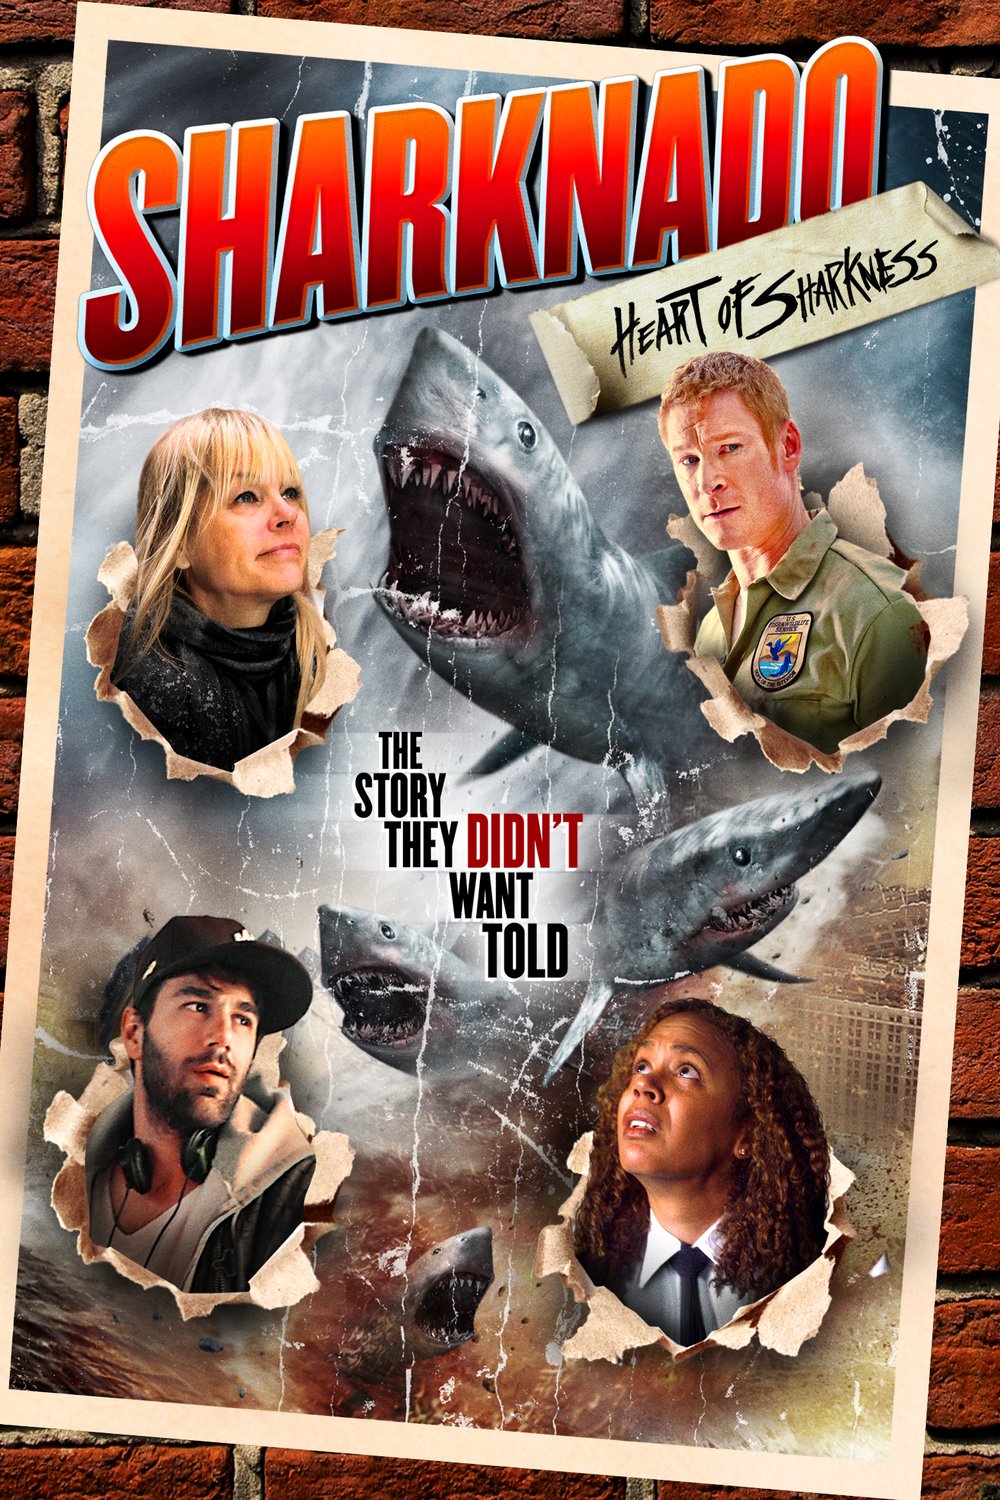 Poster of the movie Sharknado: Heart of Sharkness